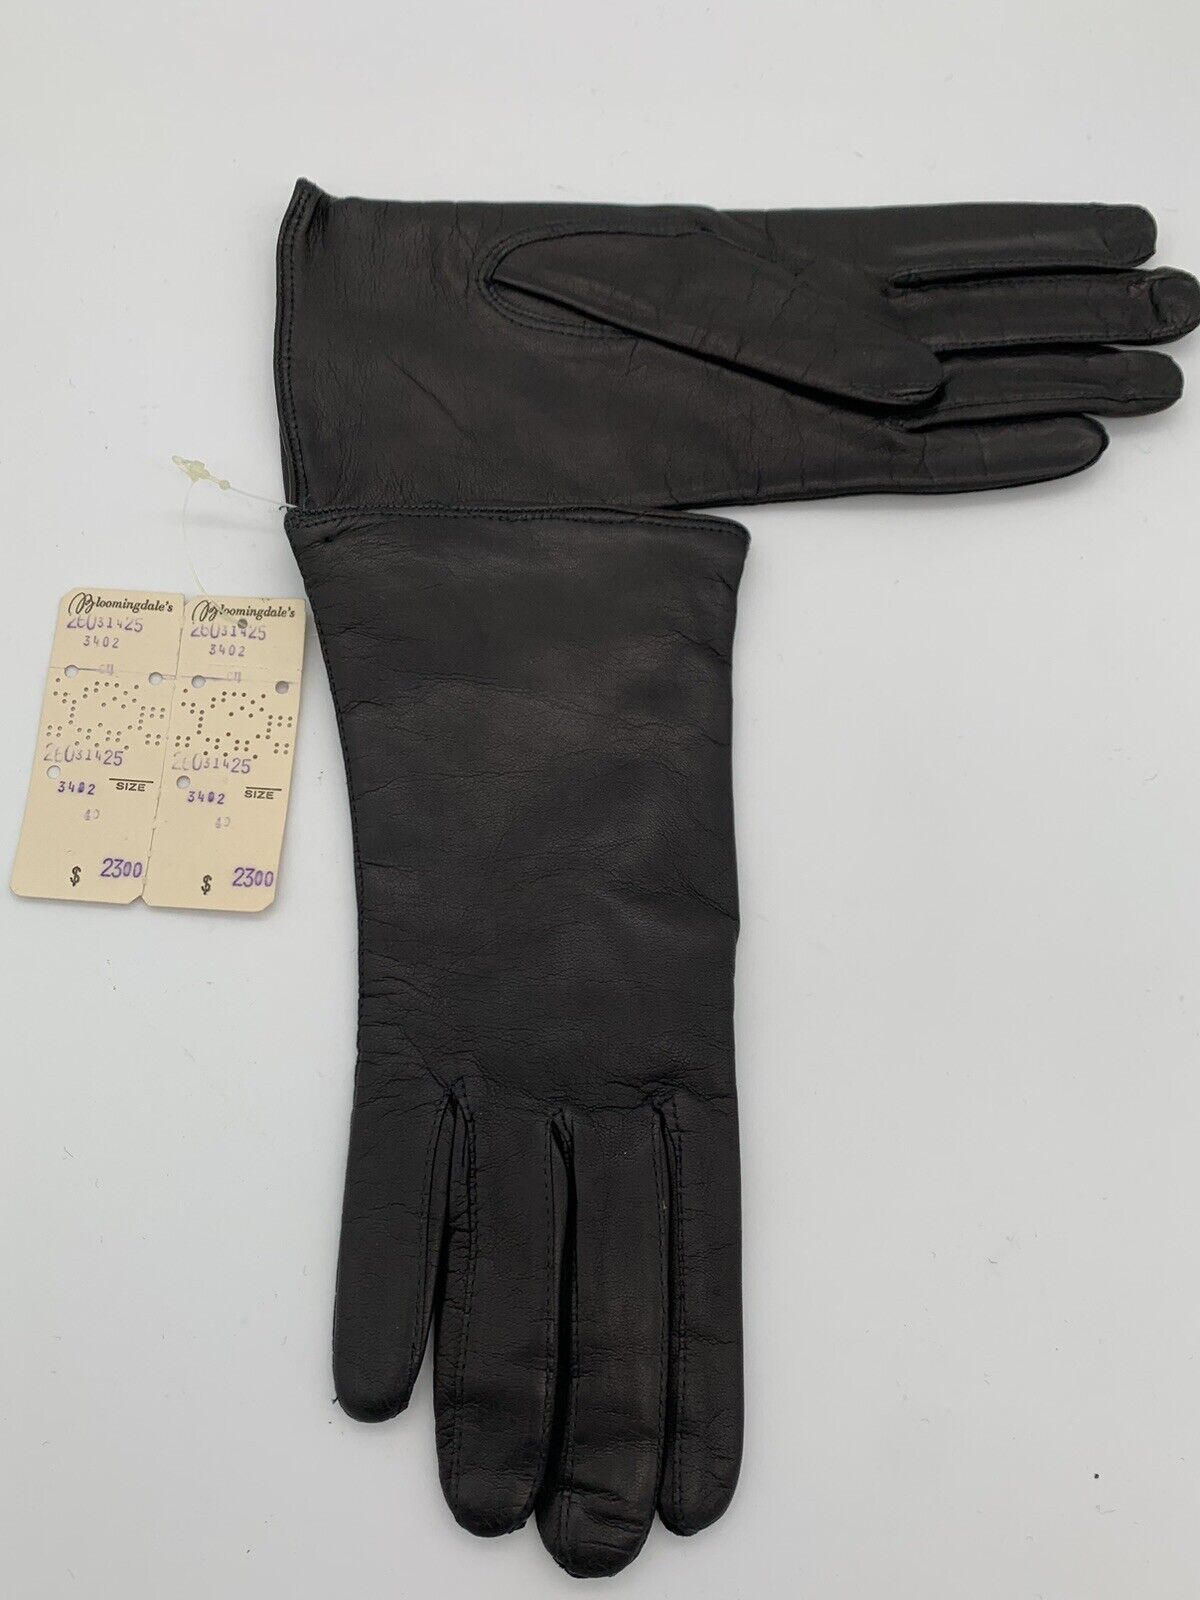 Ladies Soft Black Leather Gloves Bloomingdales Sz.6.5 Made In Italy. read